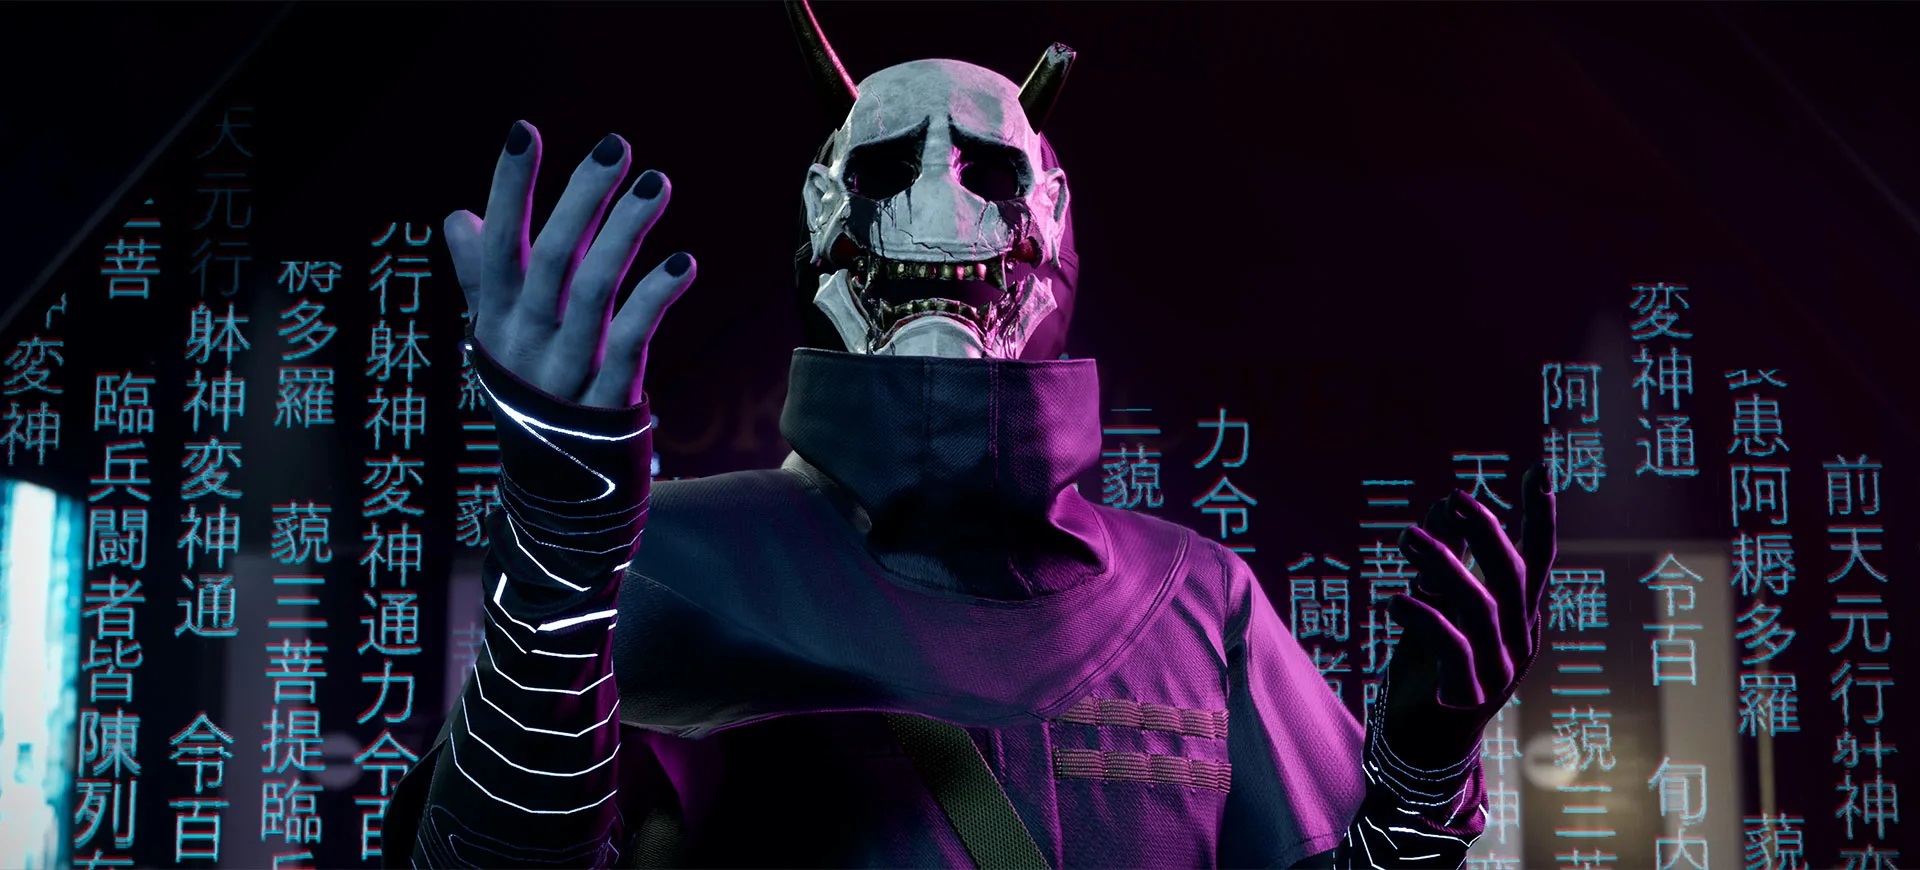 Ghostwire: Tokyo release date set for March 2022, showcase set for February 2022